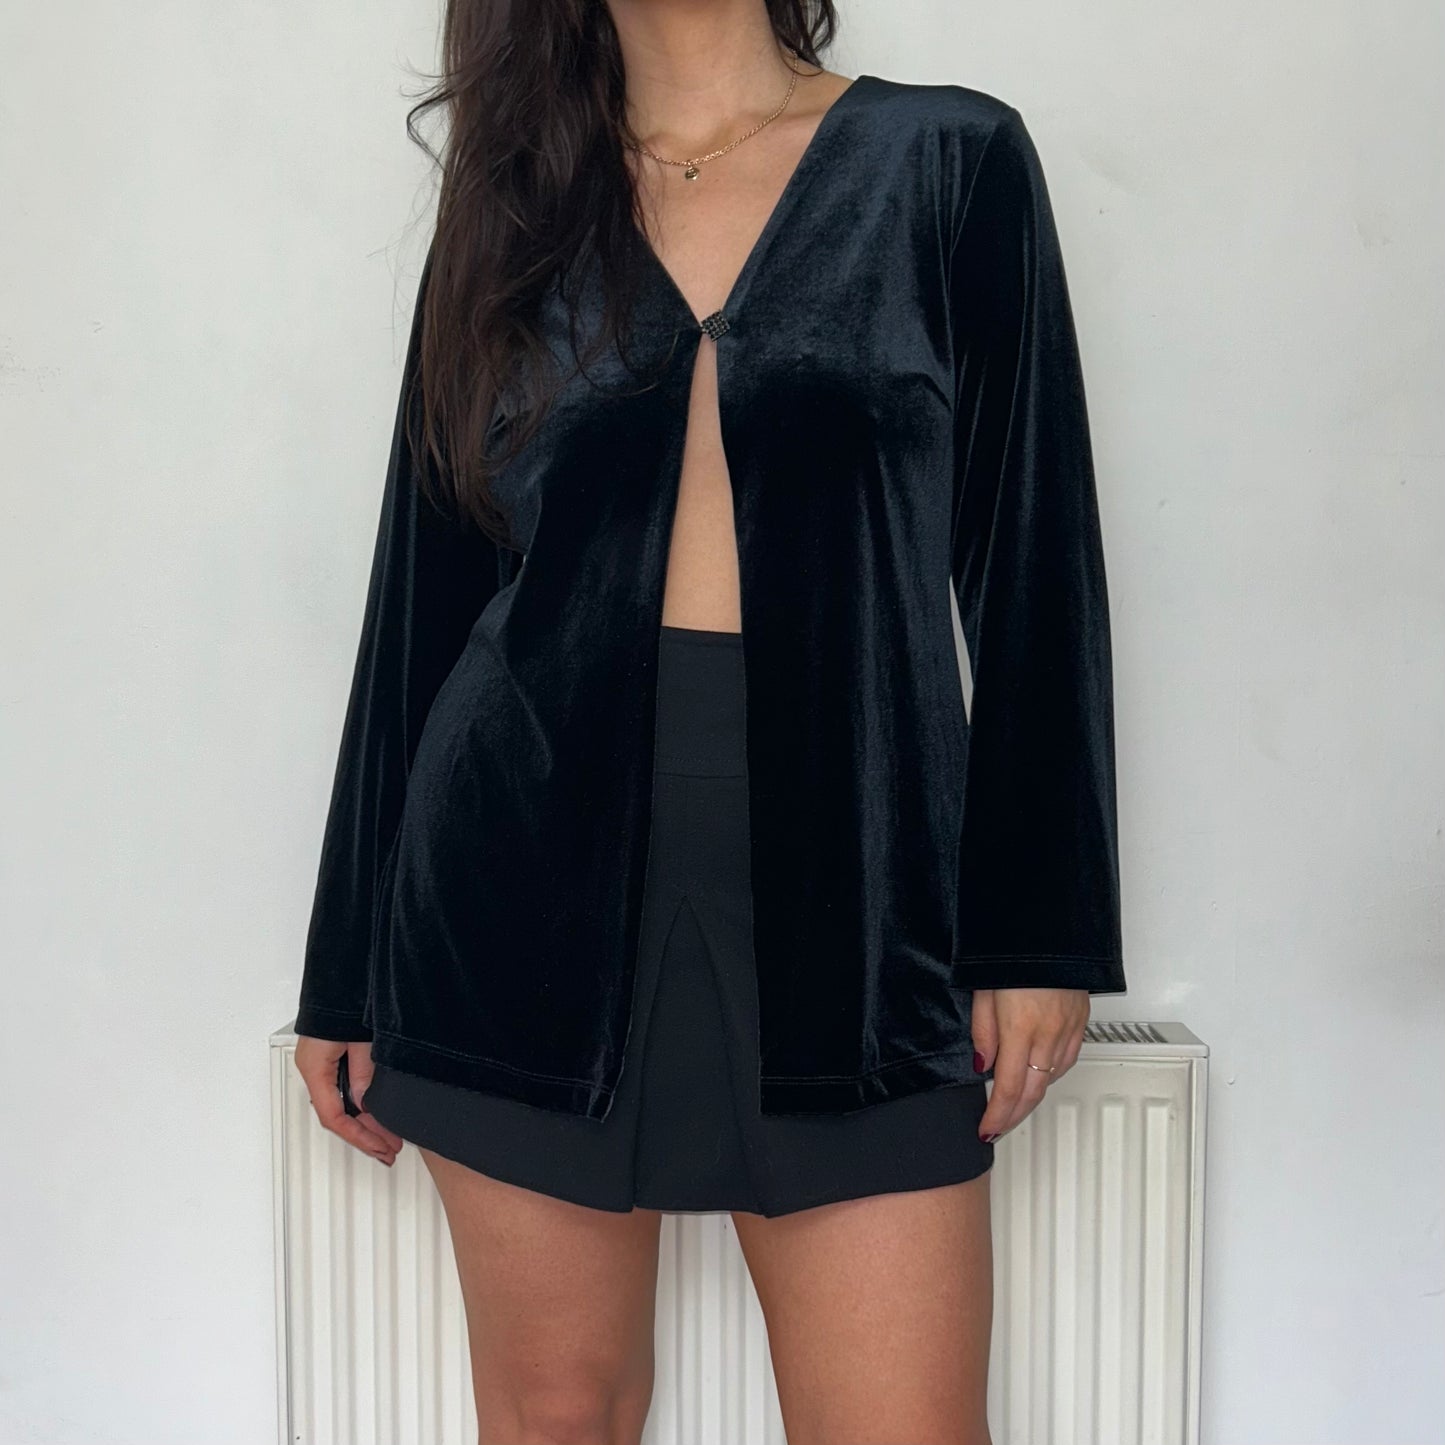 black long sleeve velvet top shown on a model wearing a black skirts and black boots